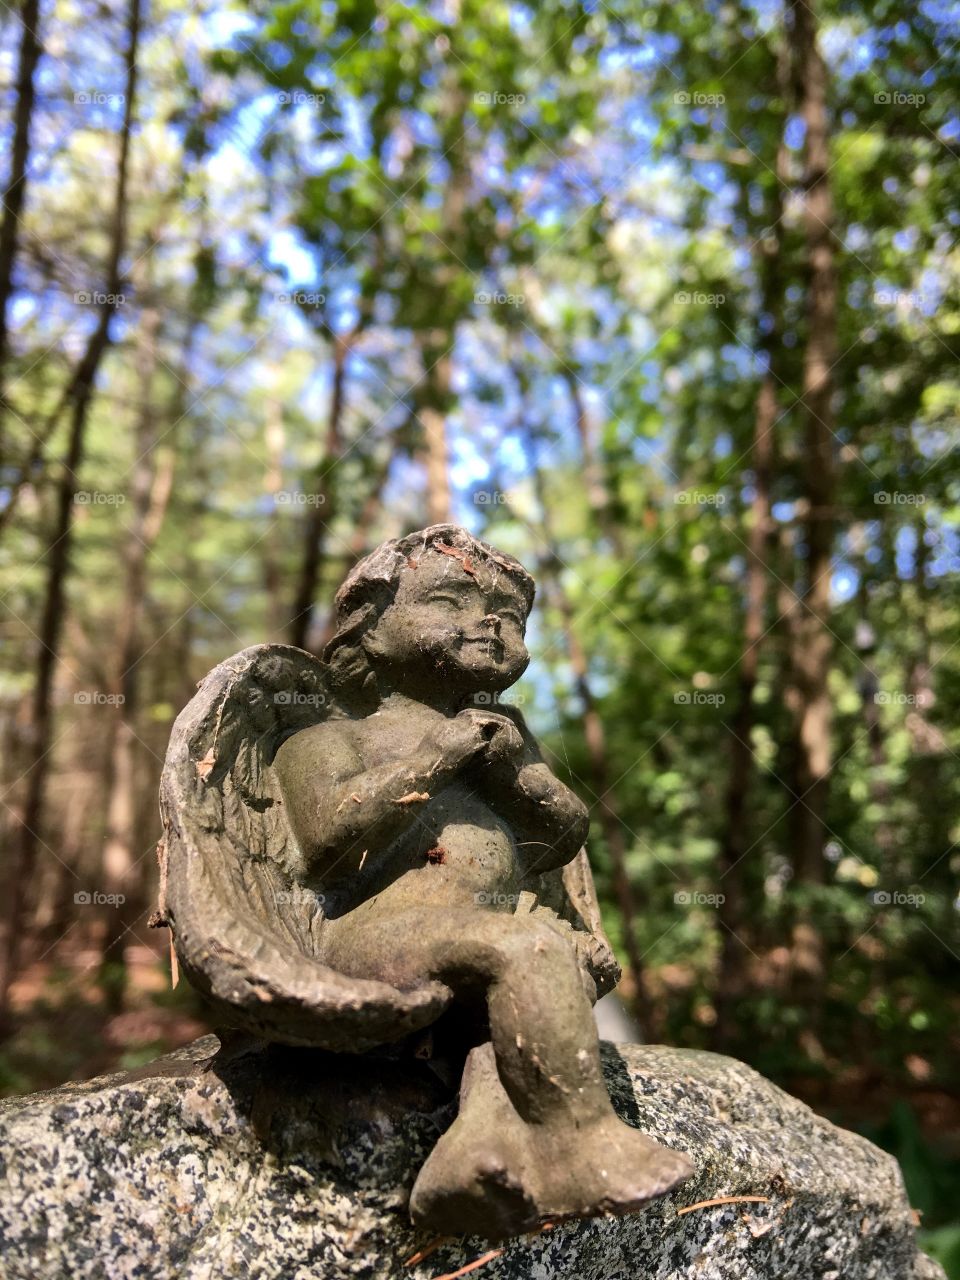 Small Angel sitting on tall rock in the woods, blue sky seen through the trees.